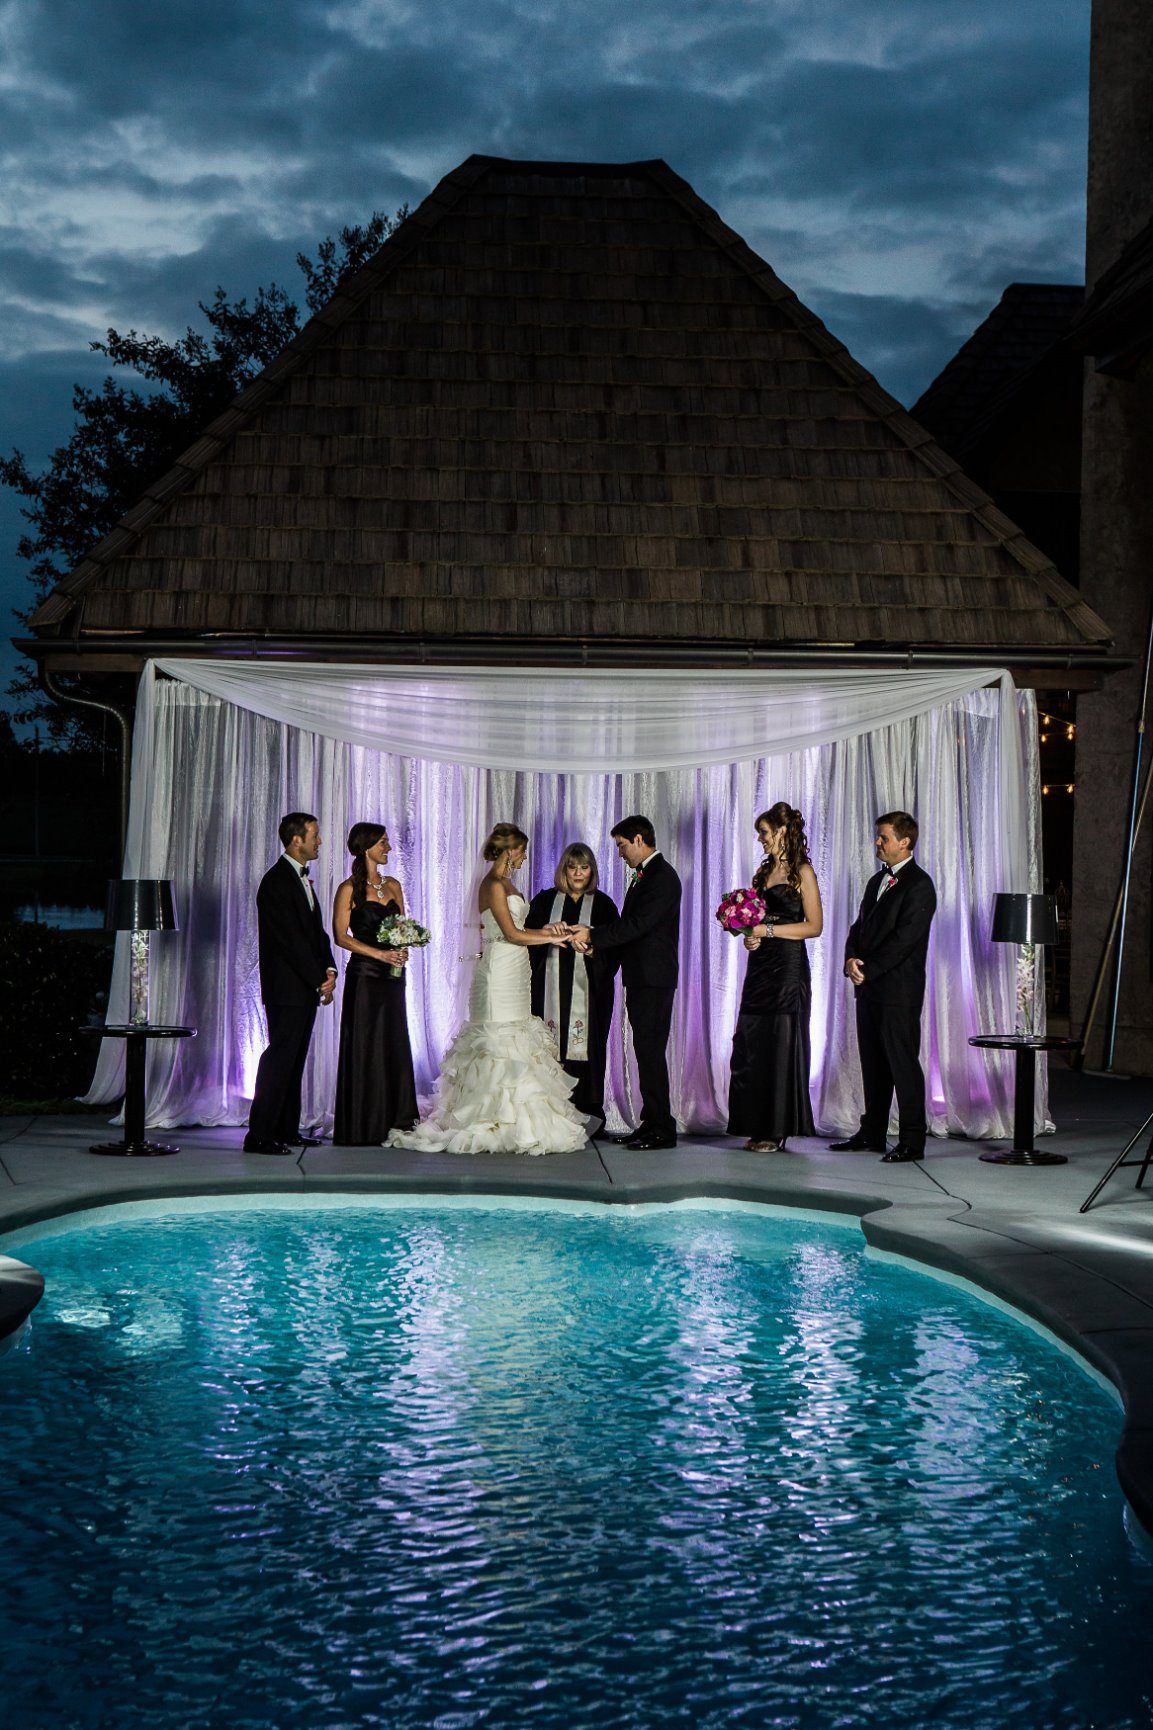 Ceremony by the Pool